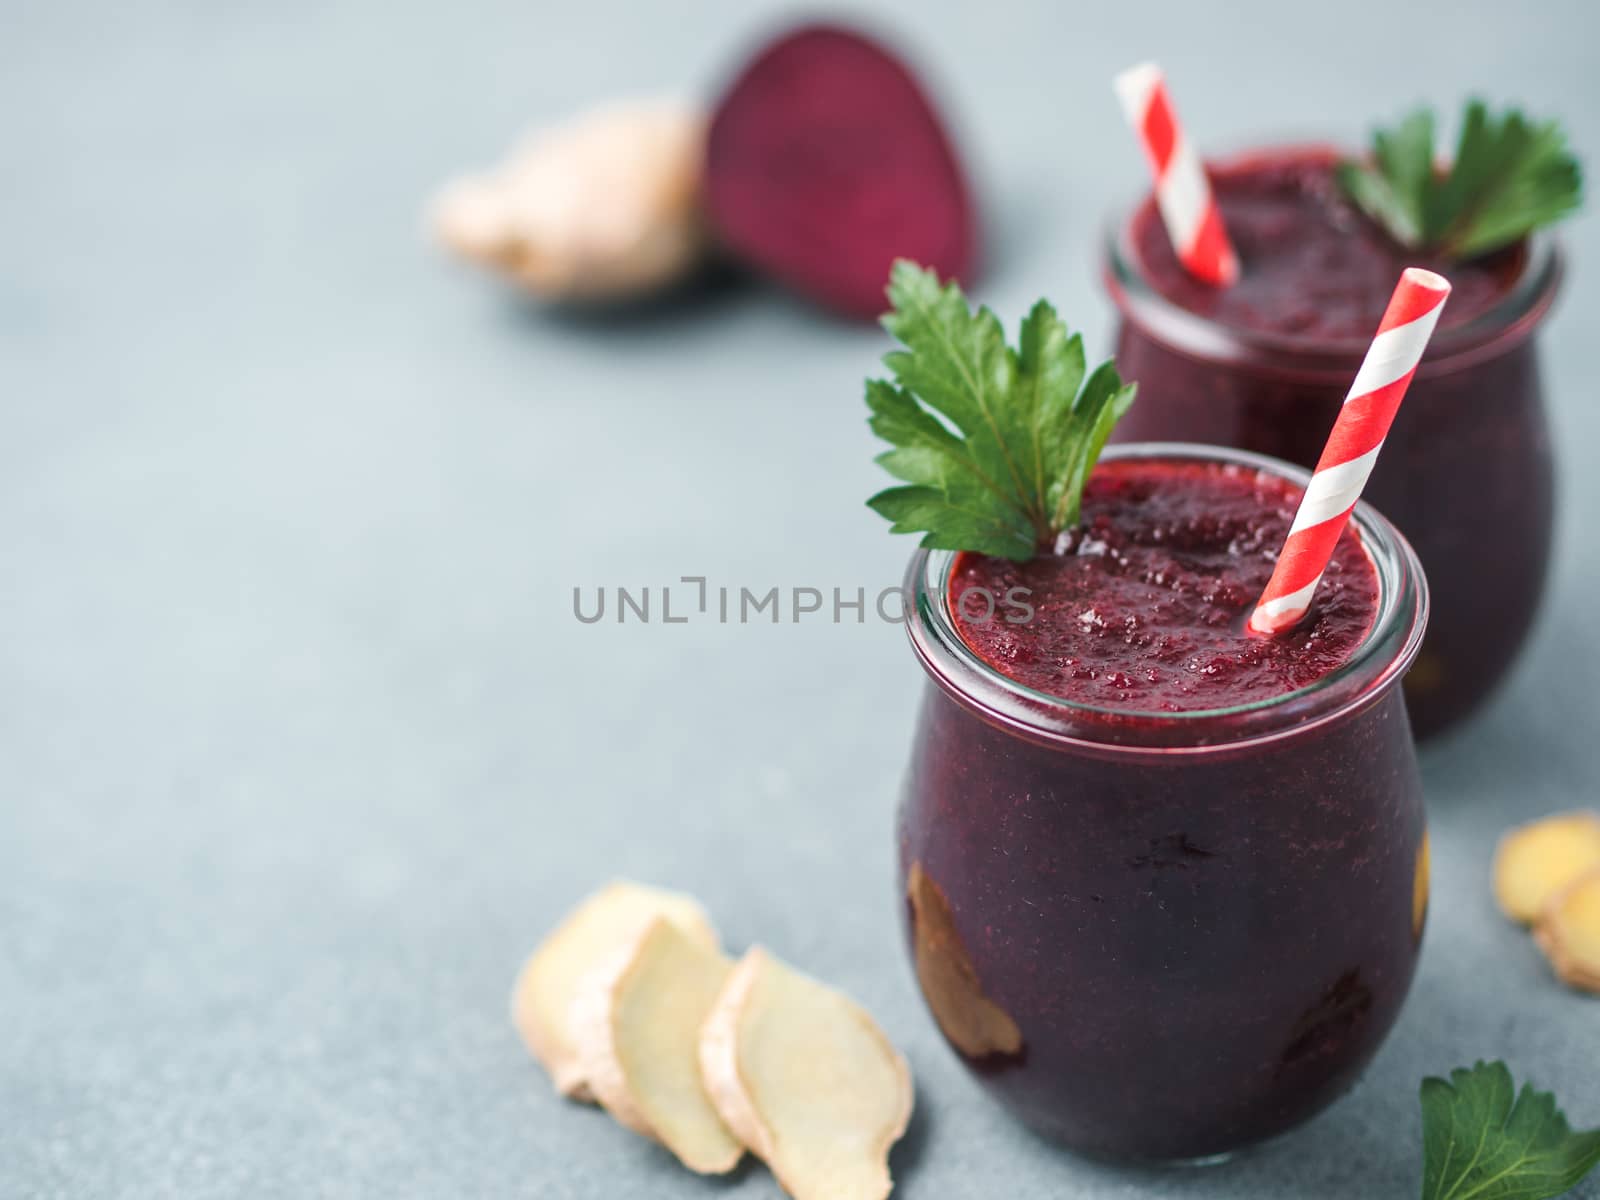 Fresh beetroot and ginger root smoothie. Beetroot smoothie in glass jar on gray table. Shallow DOF. Copy space for text. Clean eating and detox concept, recipe idea.